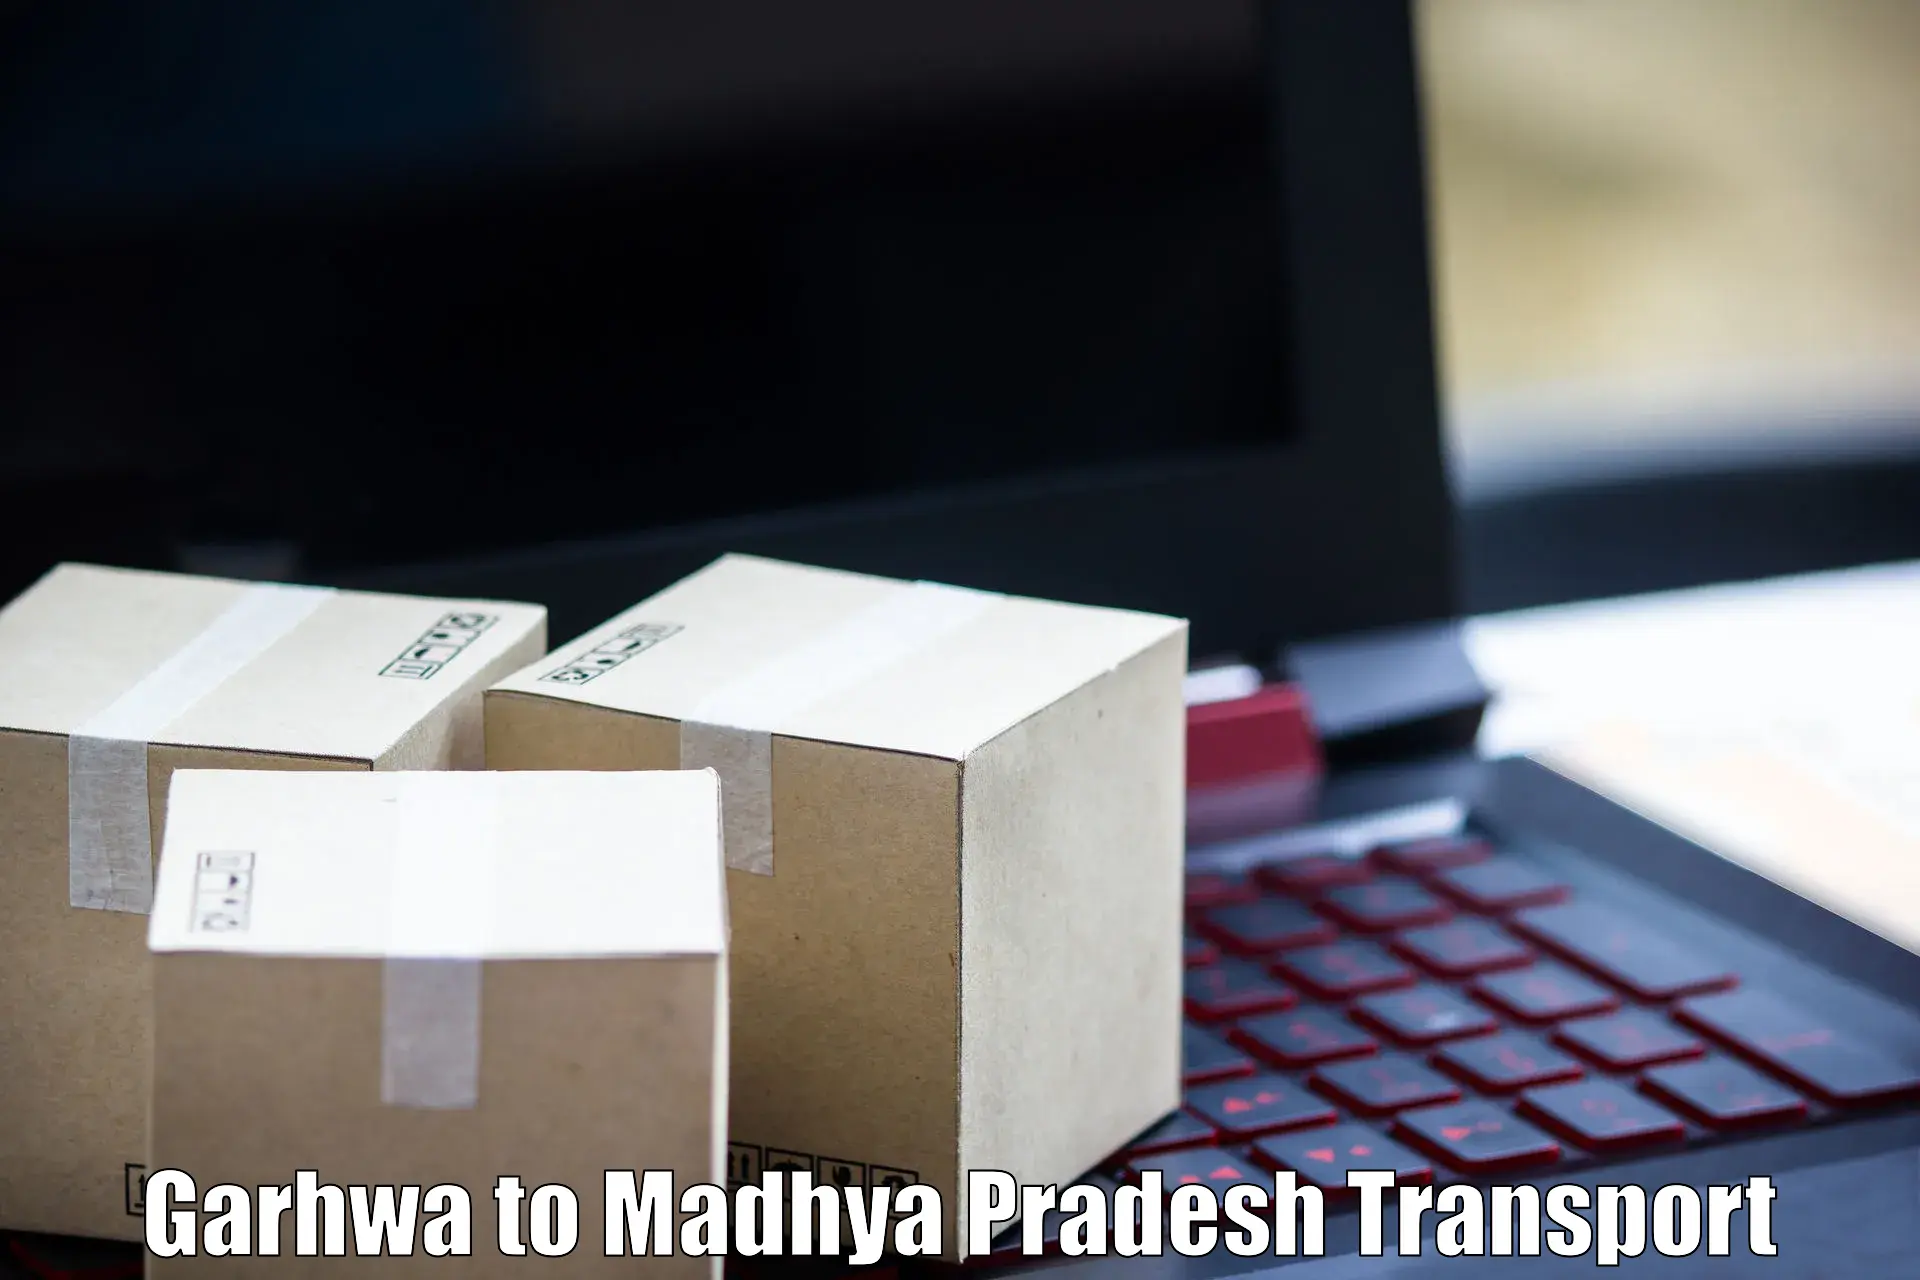 Package delivery services Garhwa to Ashoknagar